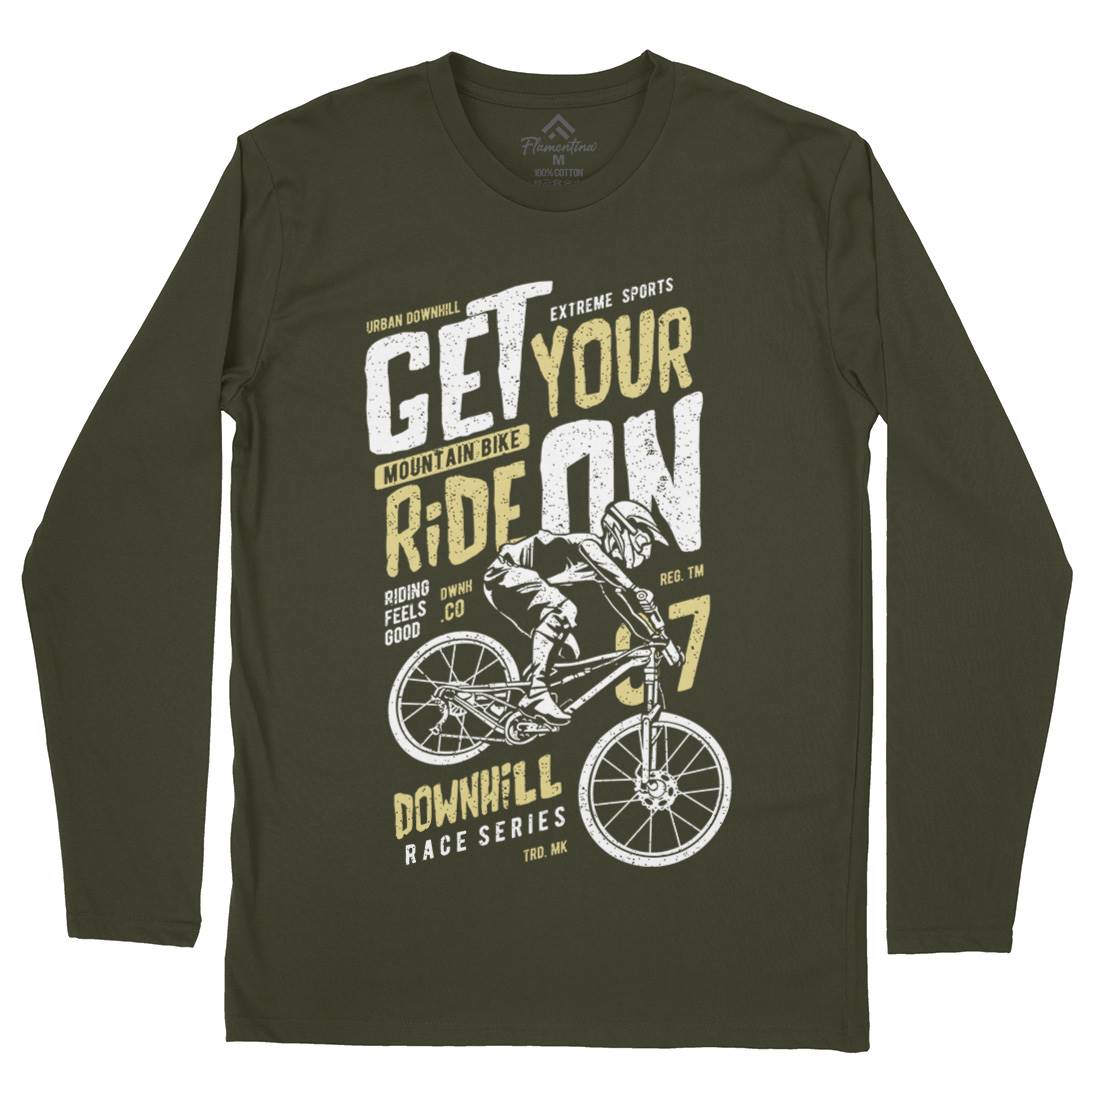 Get Your Ride Mens Long Sleeve T-Shirt Bikes A673